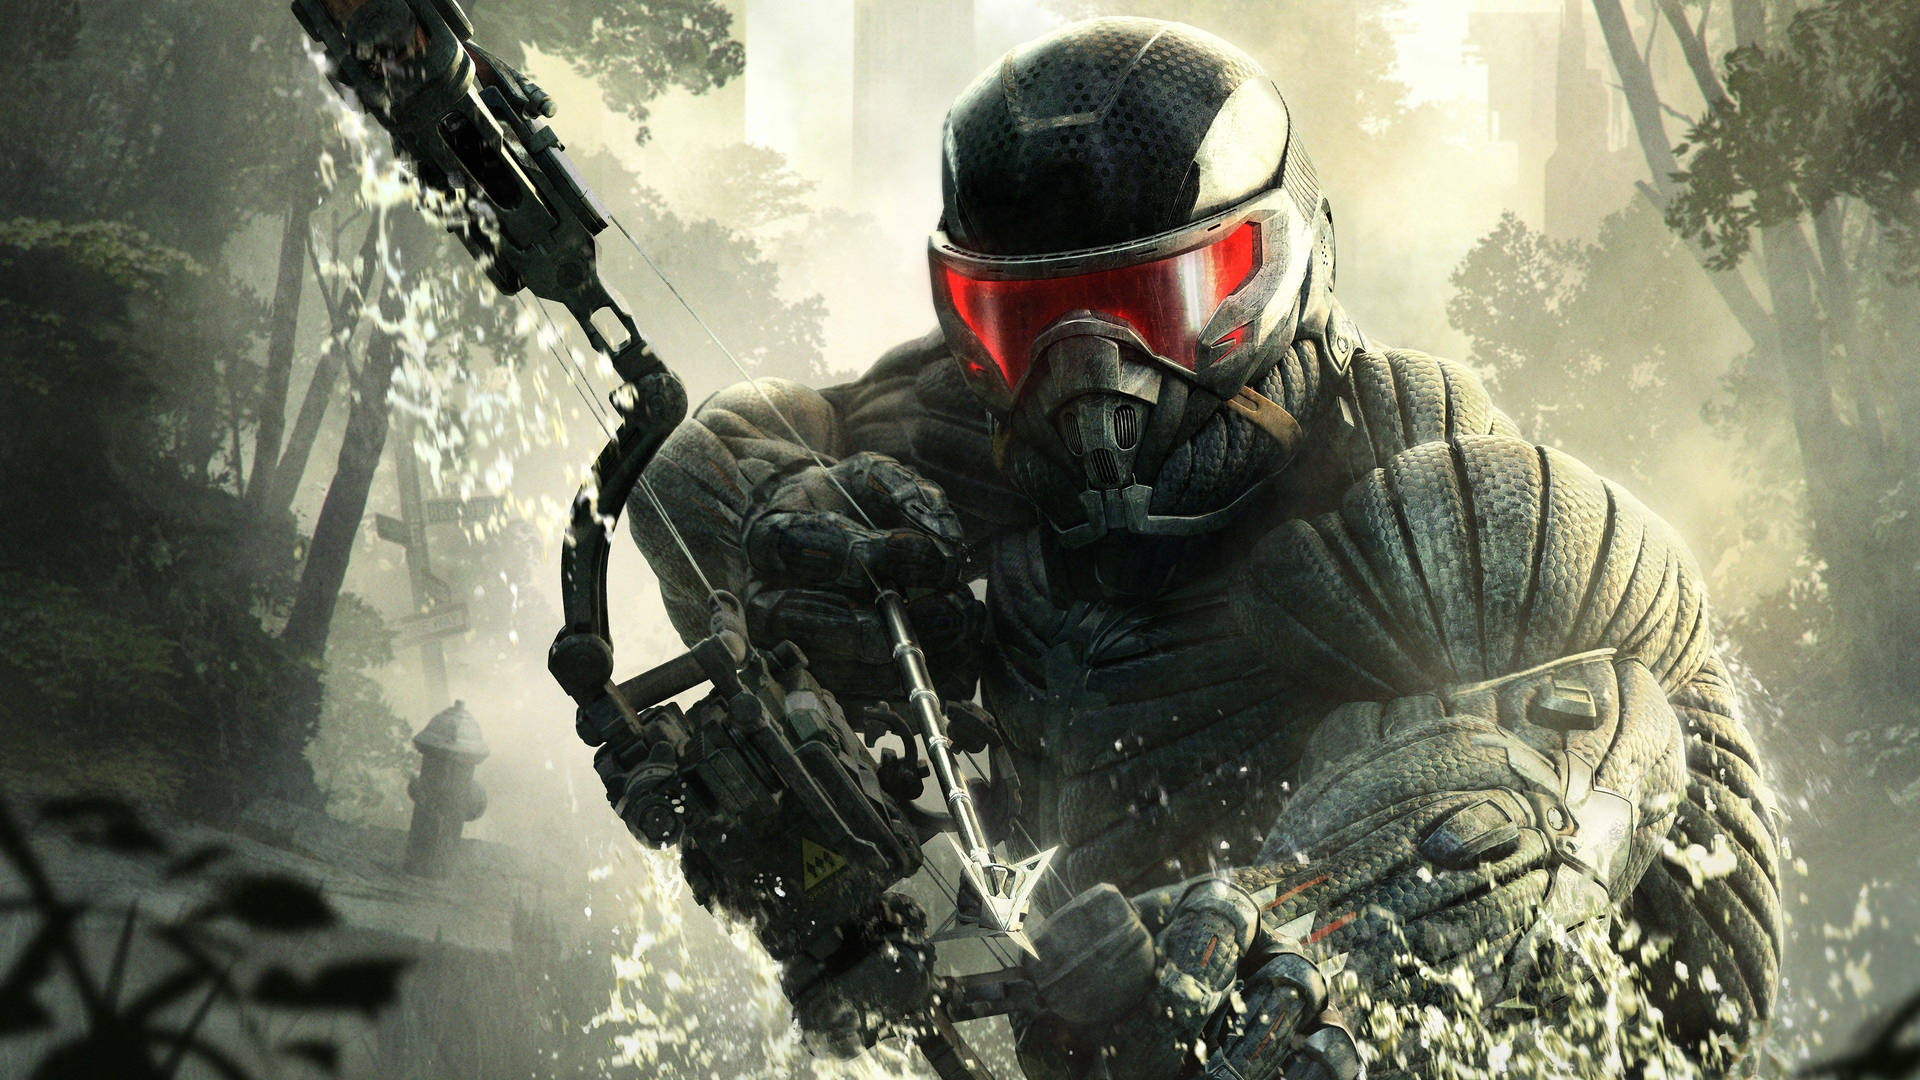 "A High Definition Update to the Iconic Shooter - Crysis Remastered" Wallpaper